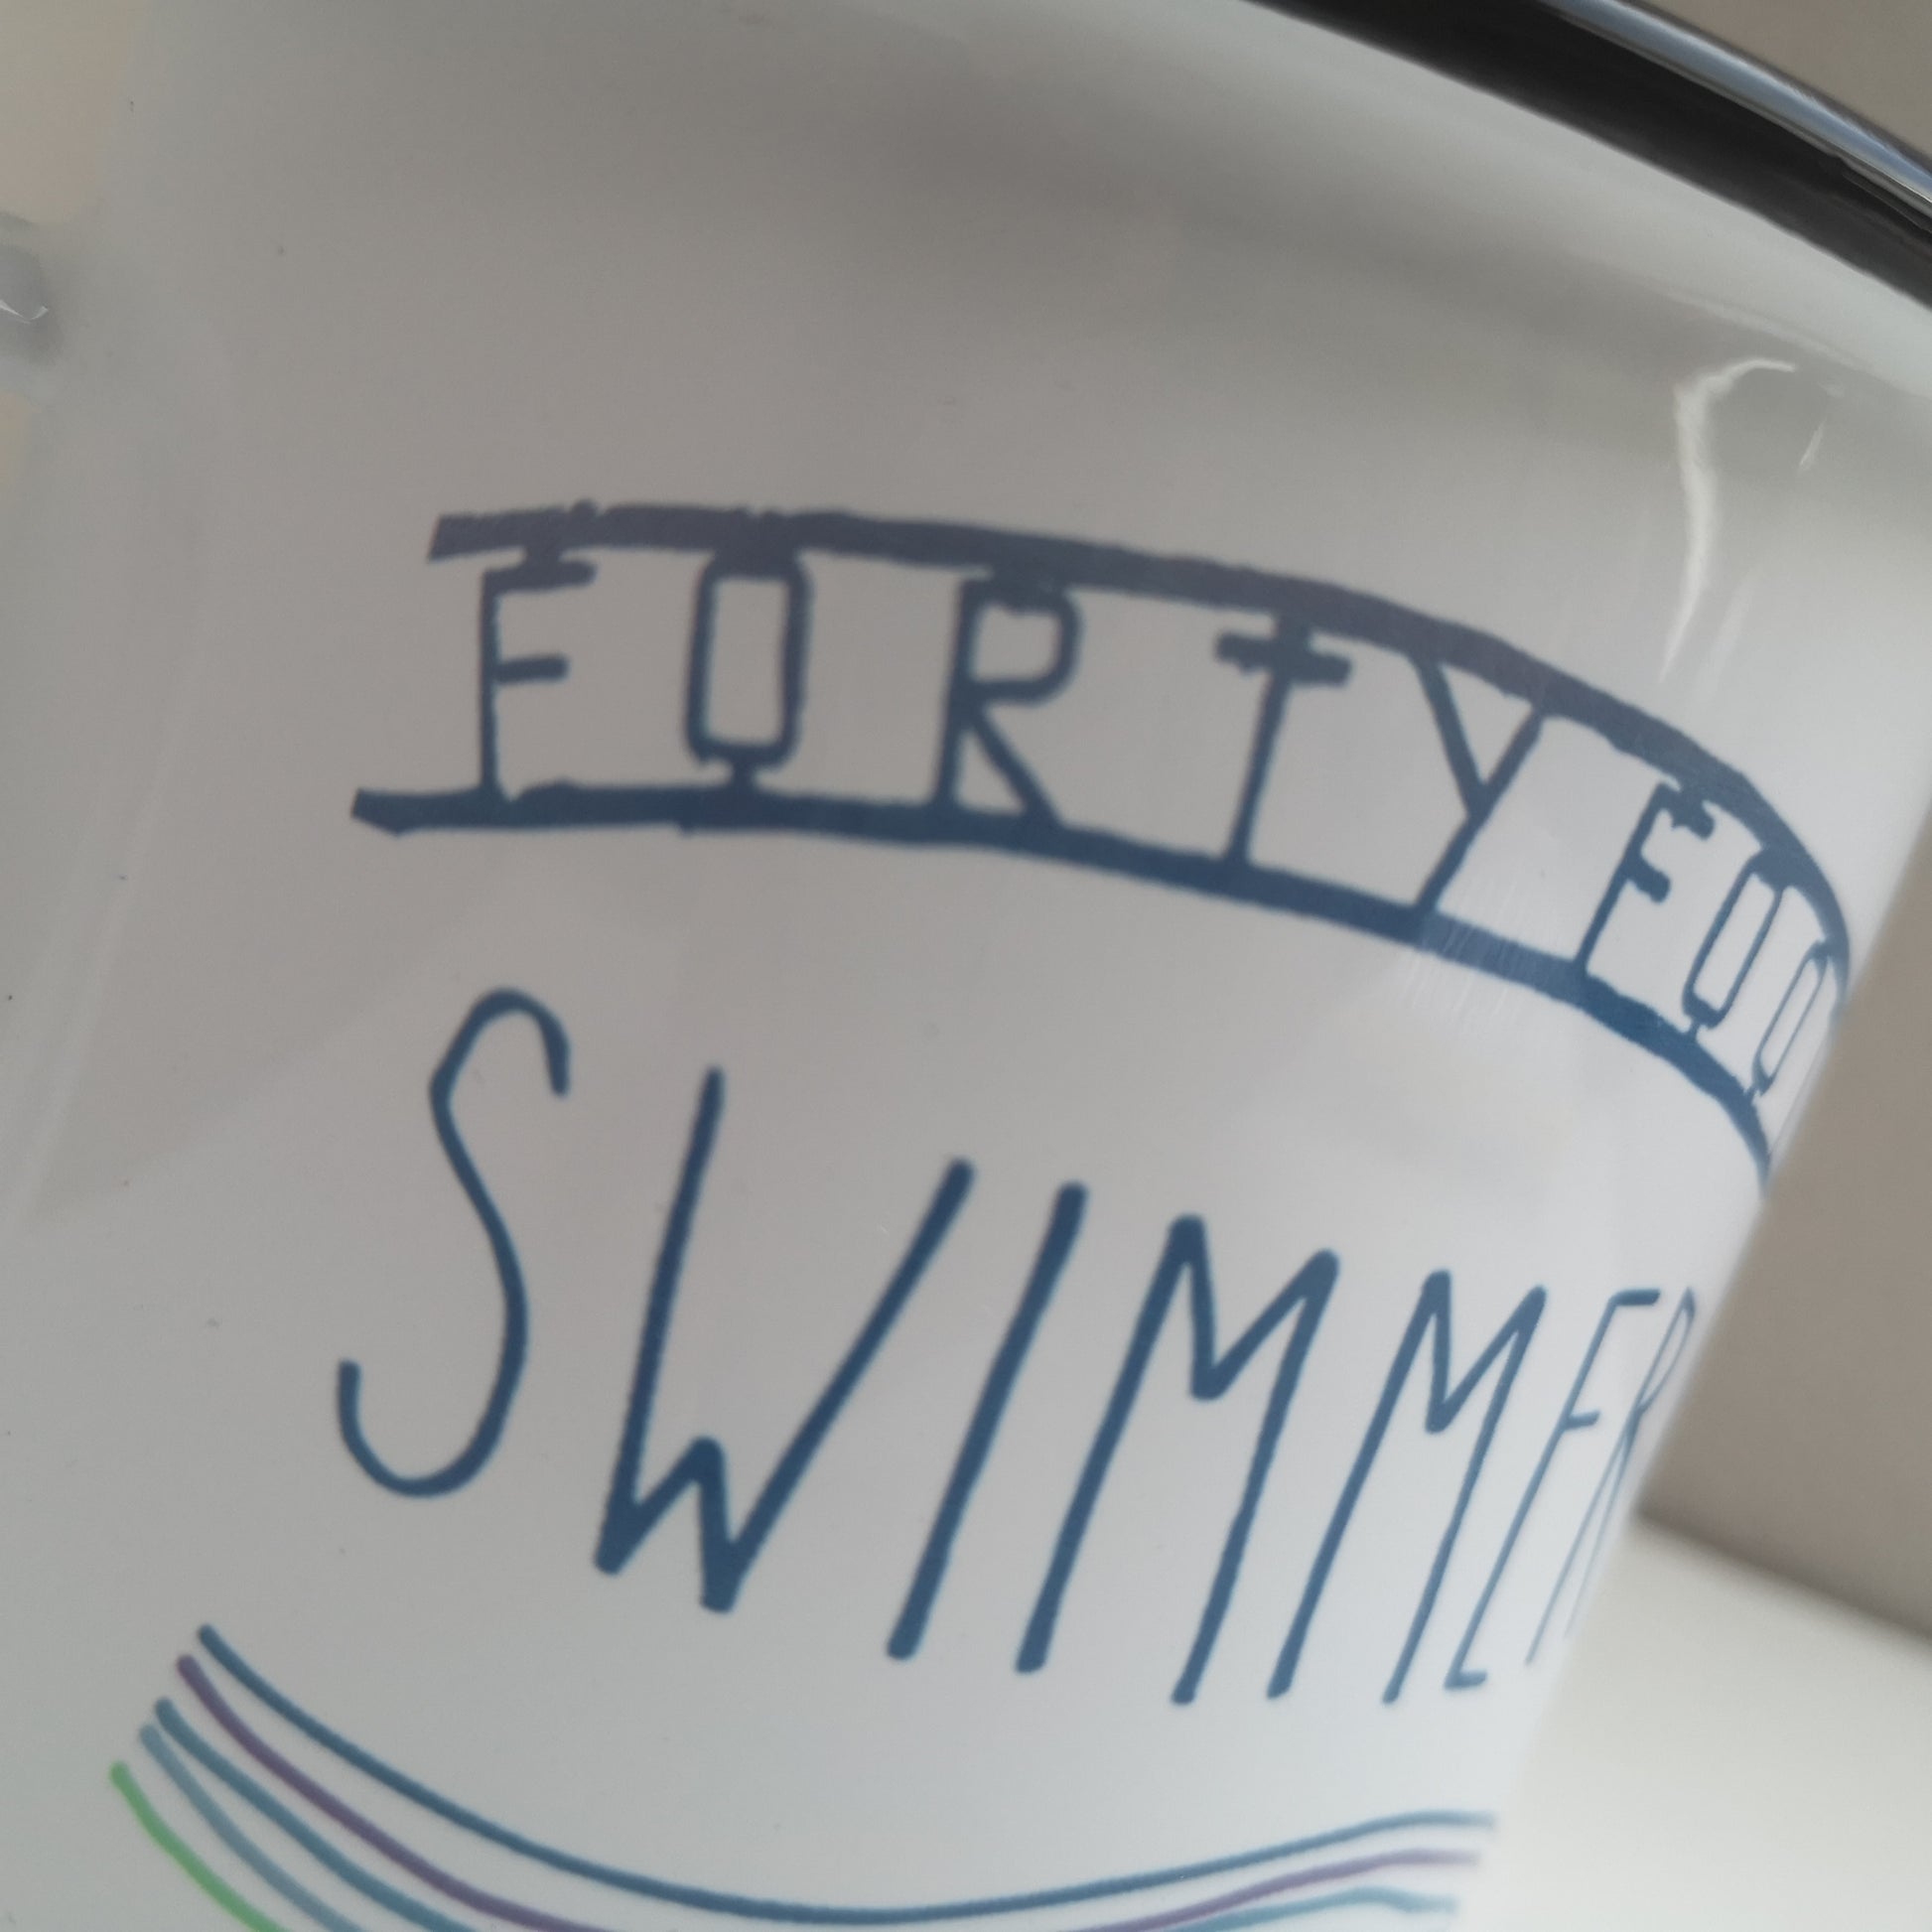 A close up of a white steel enamel mug with black rim, with FORTY FOOT SWIMMER written on it and some waves below, all in aquamarine tones.  The FORTY FOOT is the iconic sign that you see down at the bathing place